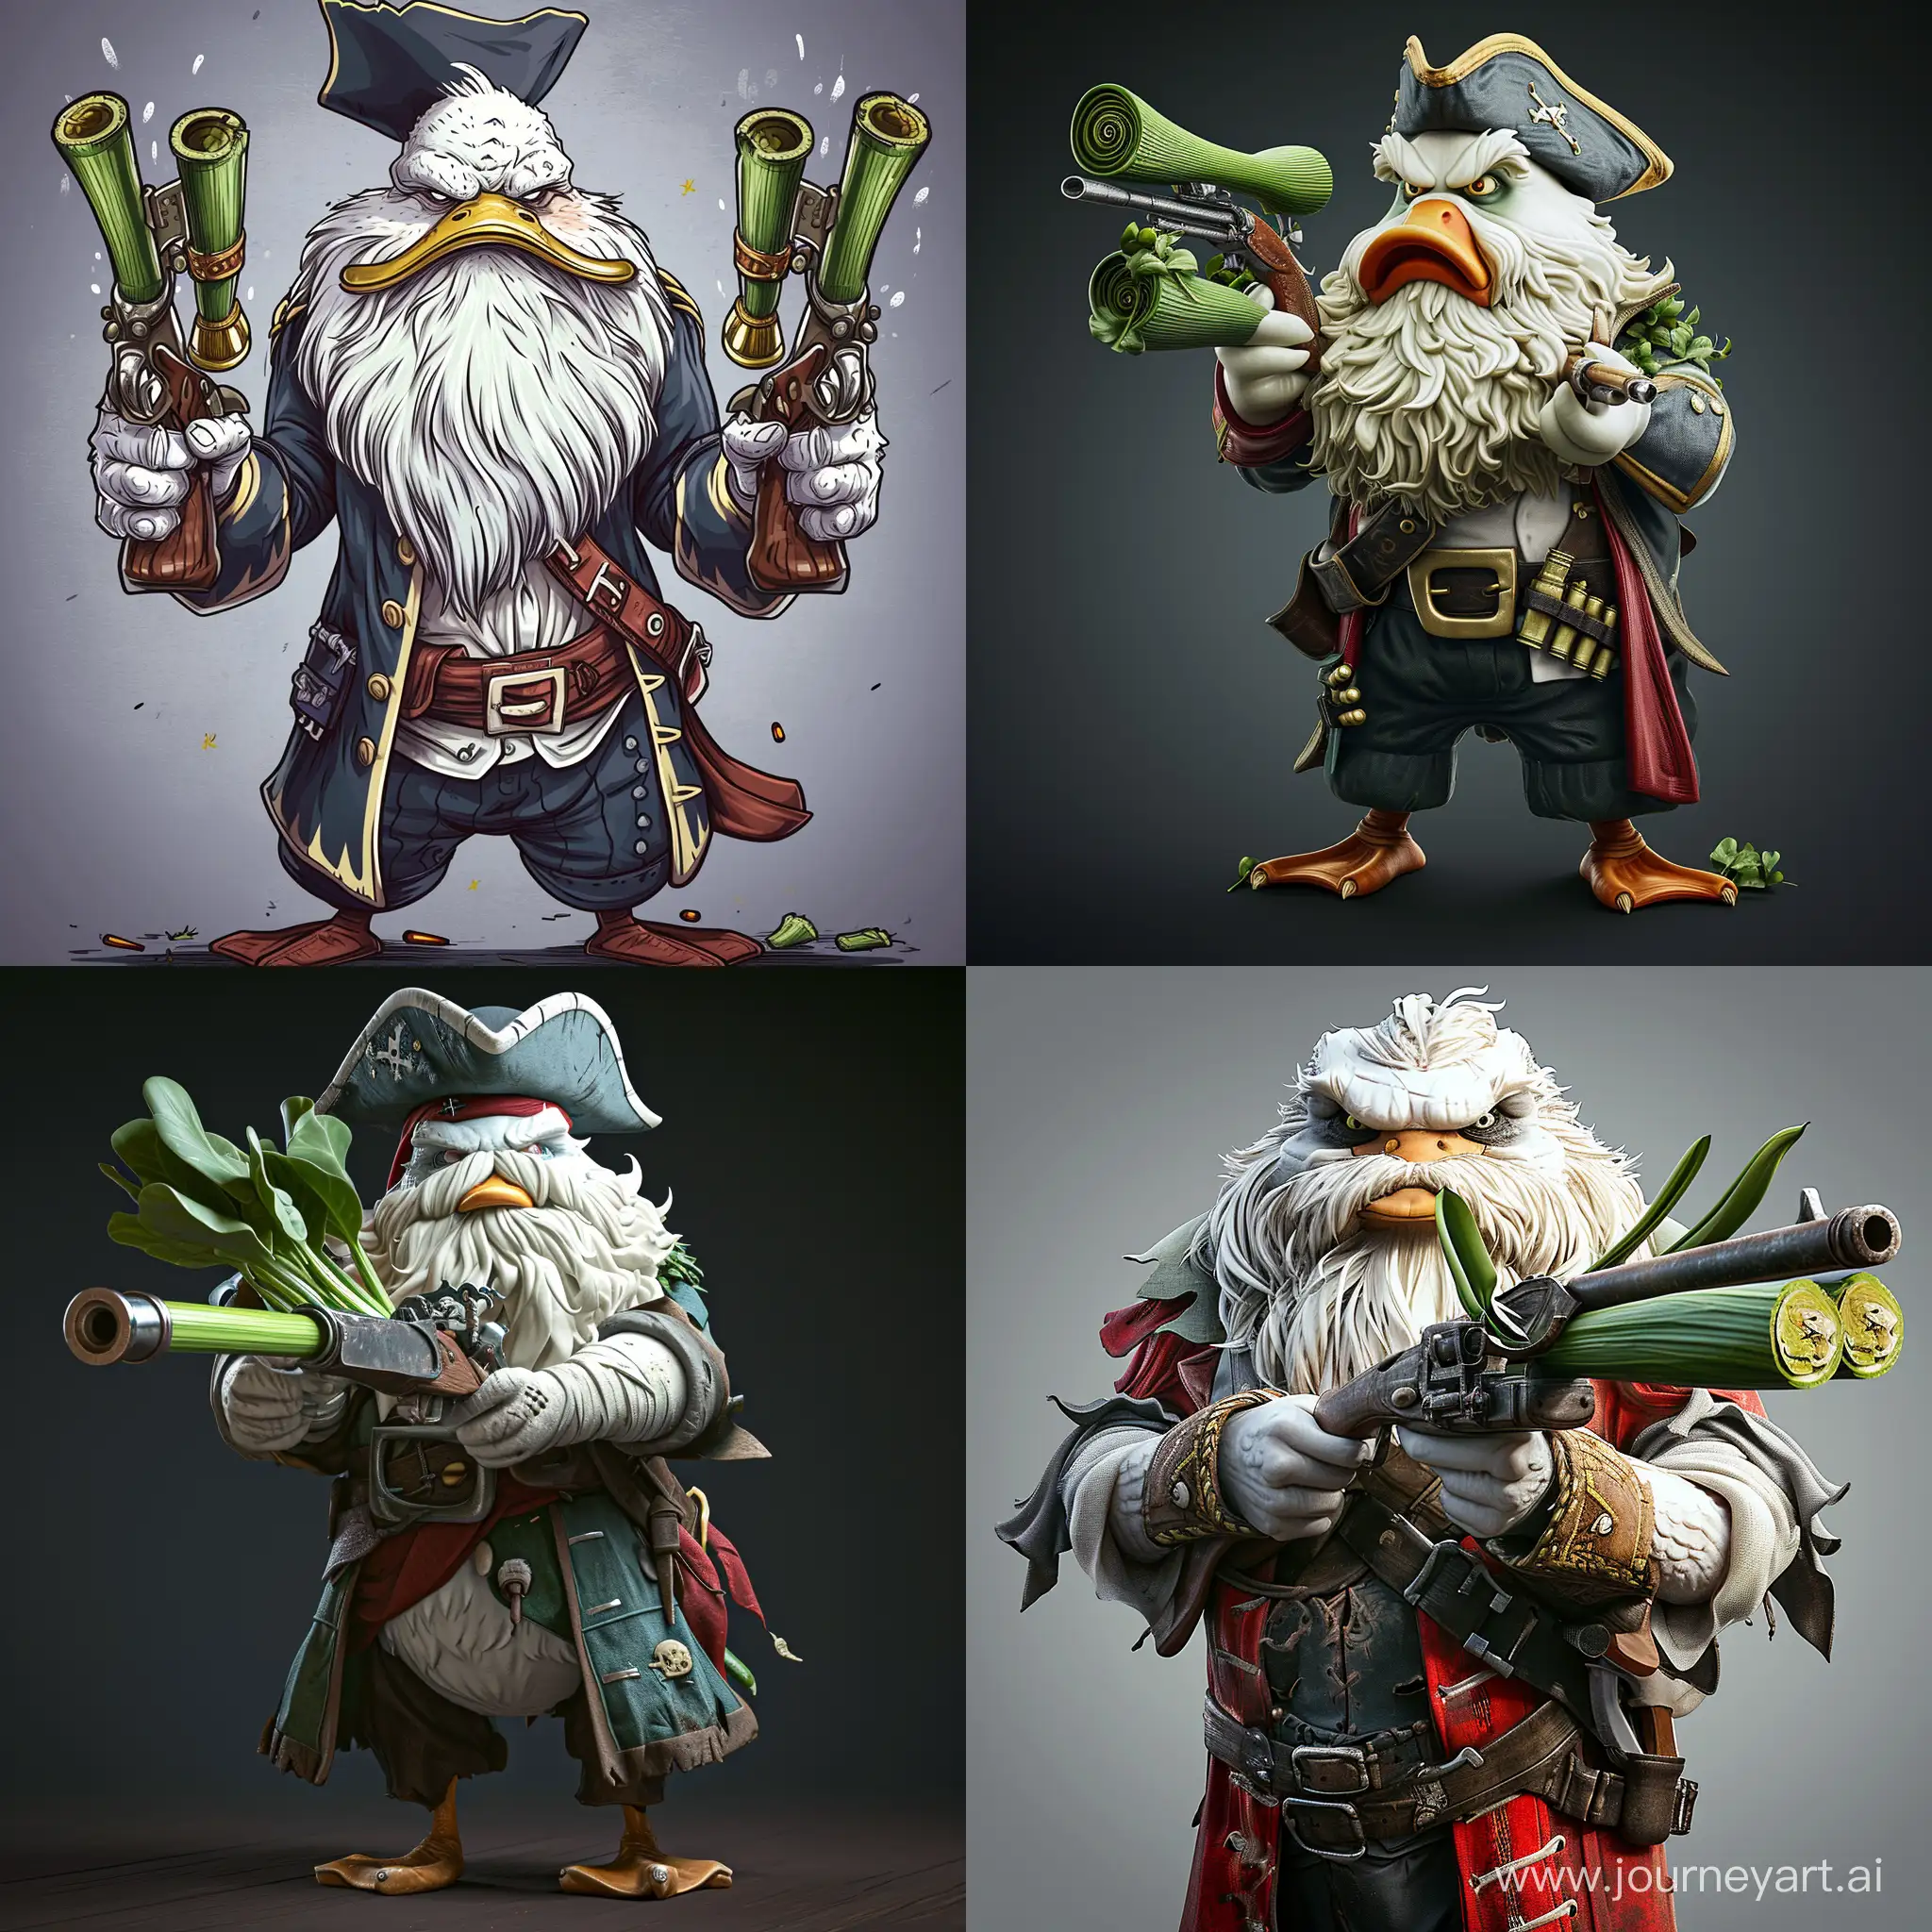 Humanoid white fat duck, wavy beard, severe and feral face, pirate captain clothes, double barrel shotgun in its hands, the shotgun's barrels are leeks, cartoon style